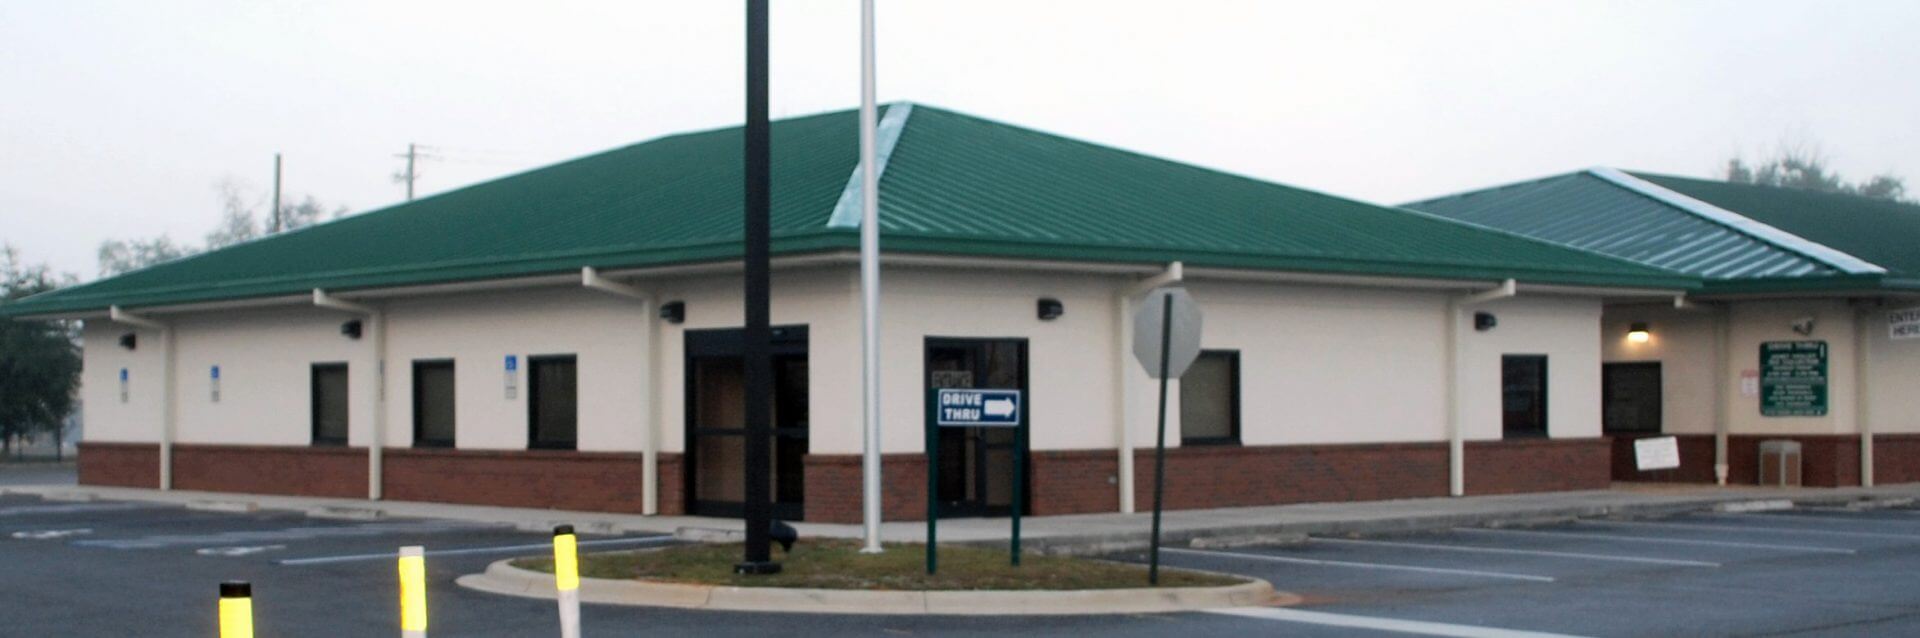 Escambia County Tax Collector - Marcus Pointe Office